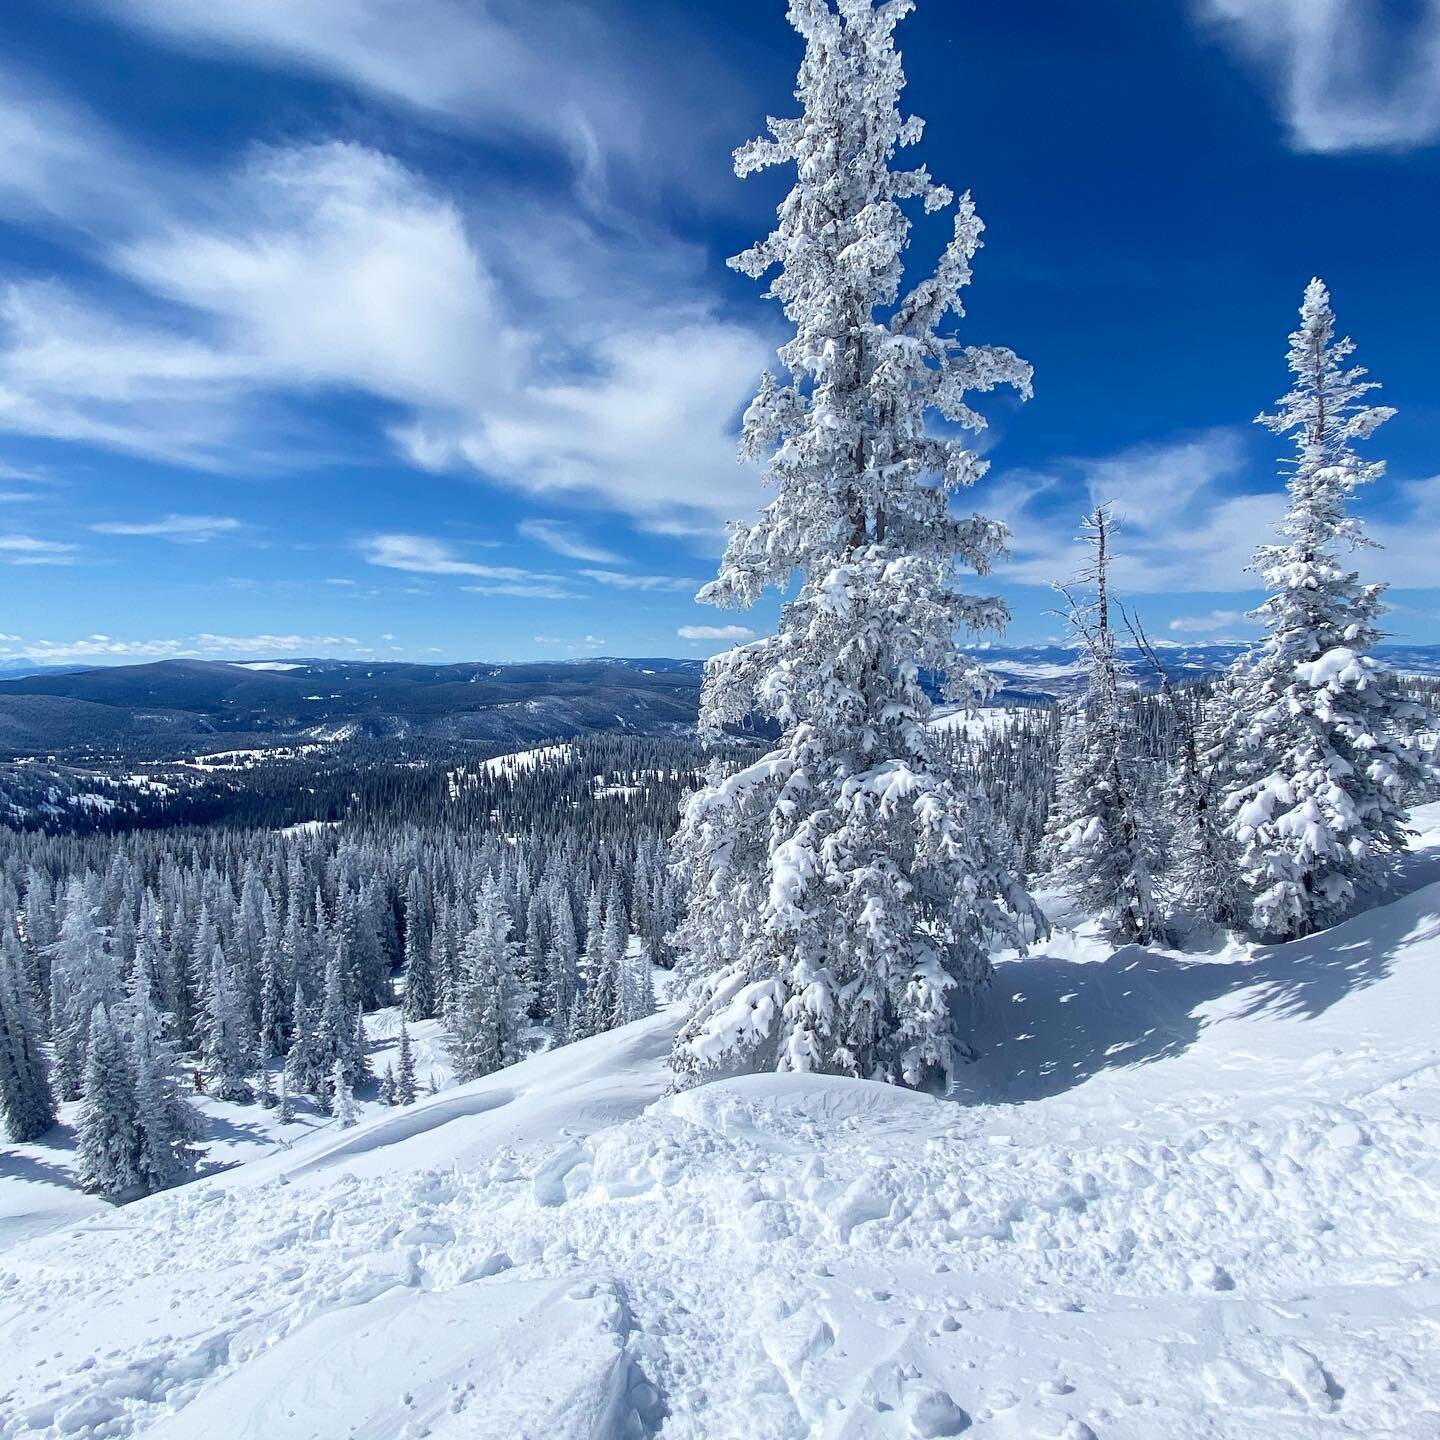 great day for it at @steamboatresort #steamboatsprings #colorado